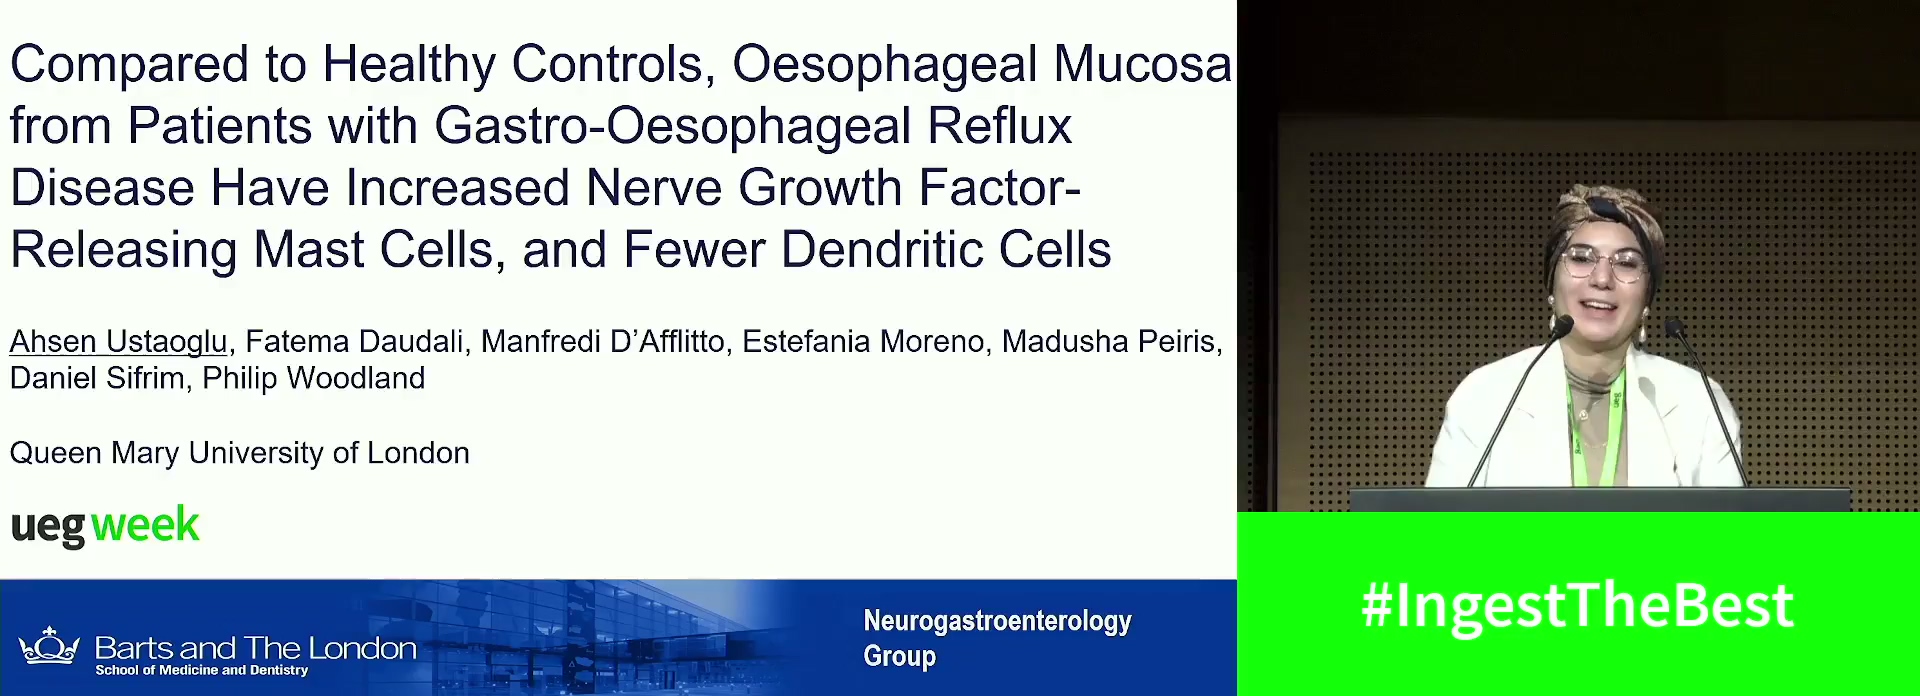 COMPARED TO HEALTHY SUBJECTS, OESOPHAGEAL MUCOSA FROM PATIENTS WITH GASTRO-OESOPHAGEAL REFLUX DISEASE HAVE INCREASED NERVE GROWTH FACTOR-RELEASING MAST CELLS, AND FEWER DENDRITIC CELLS